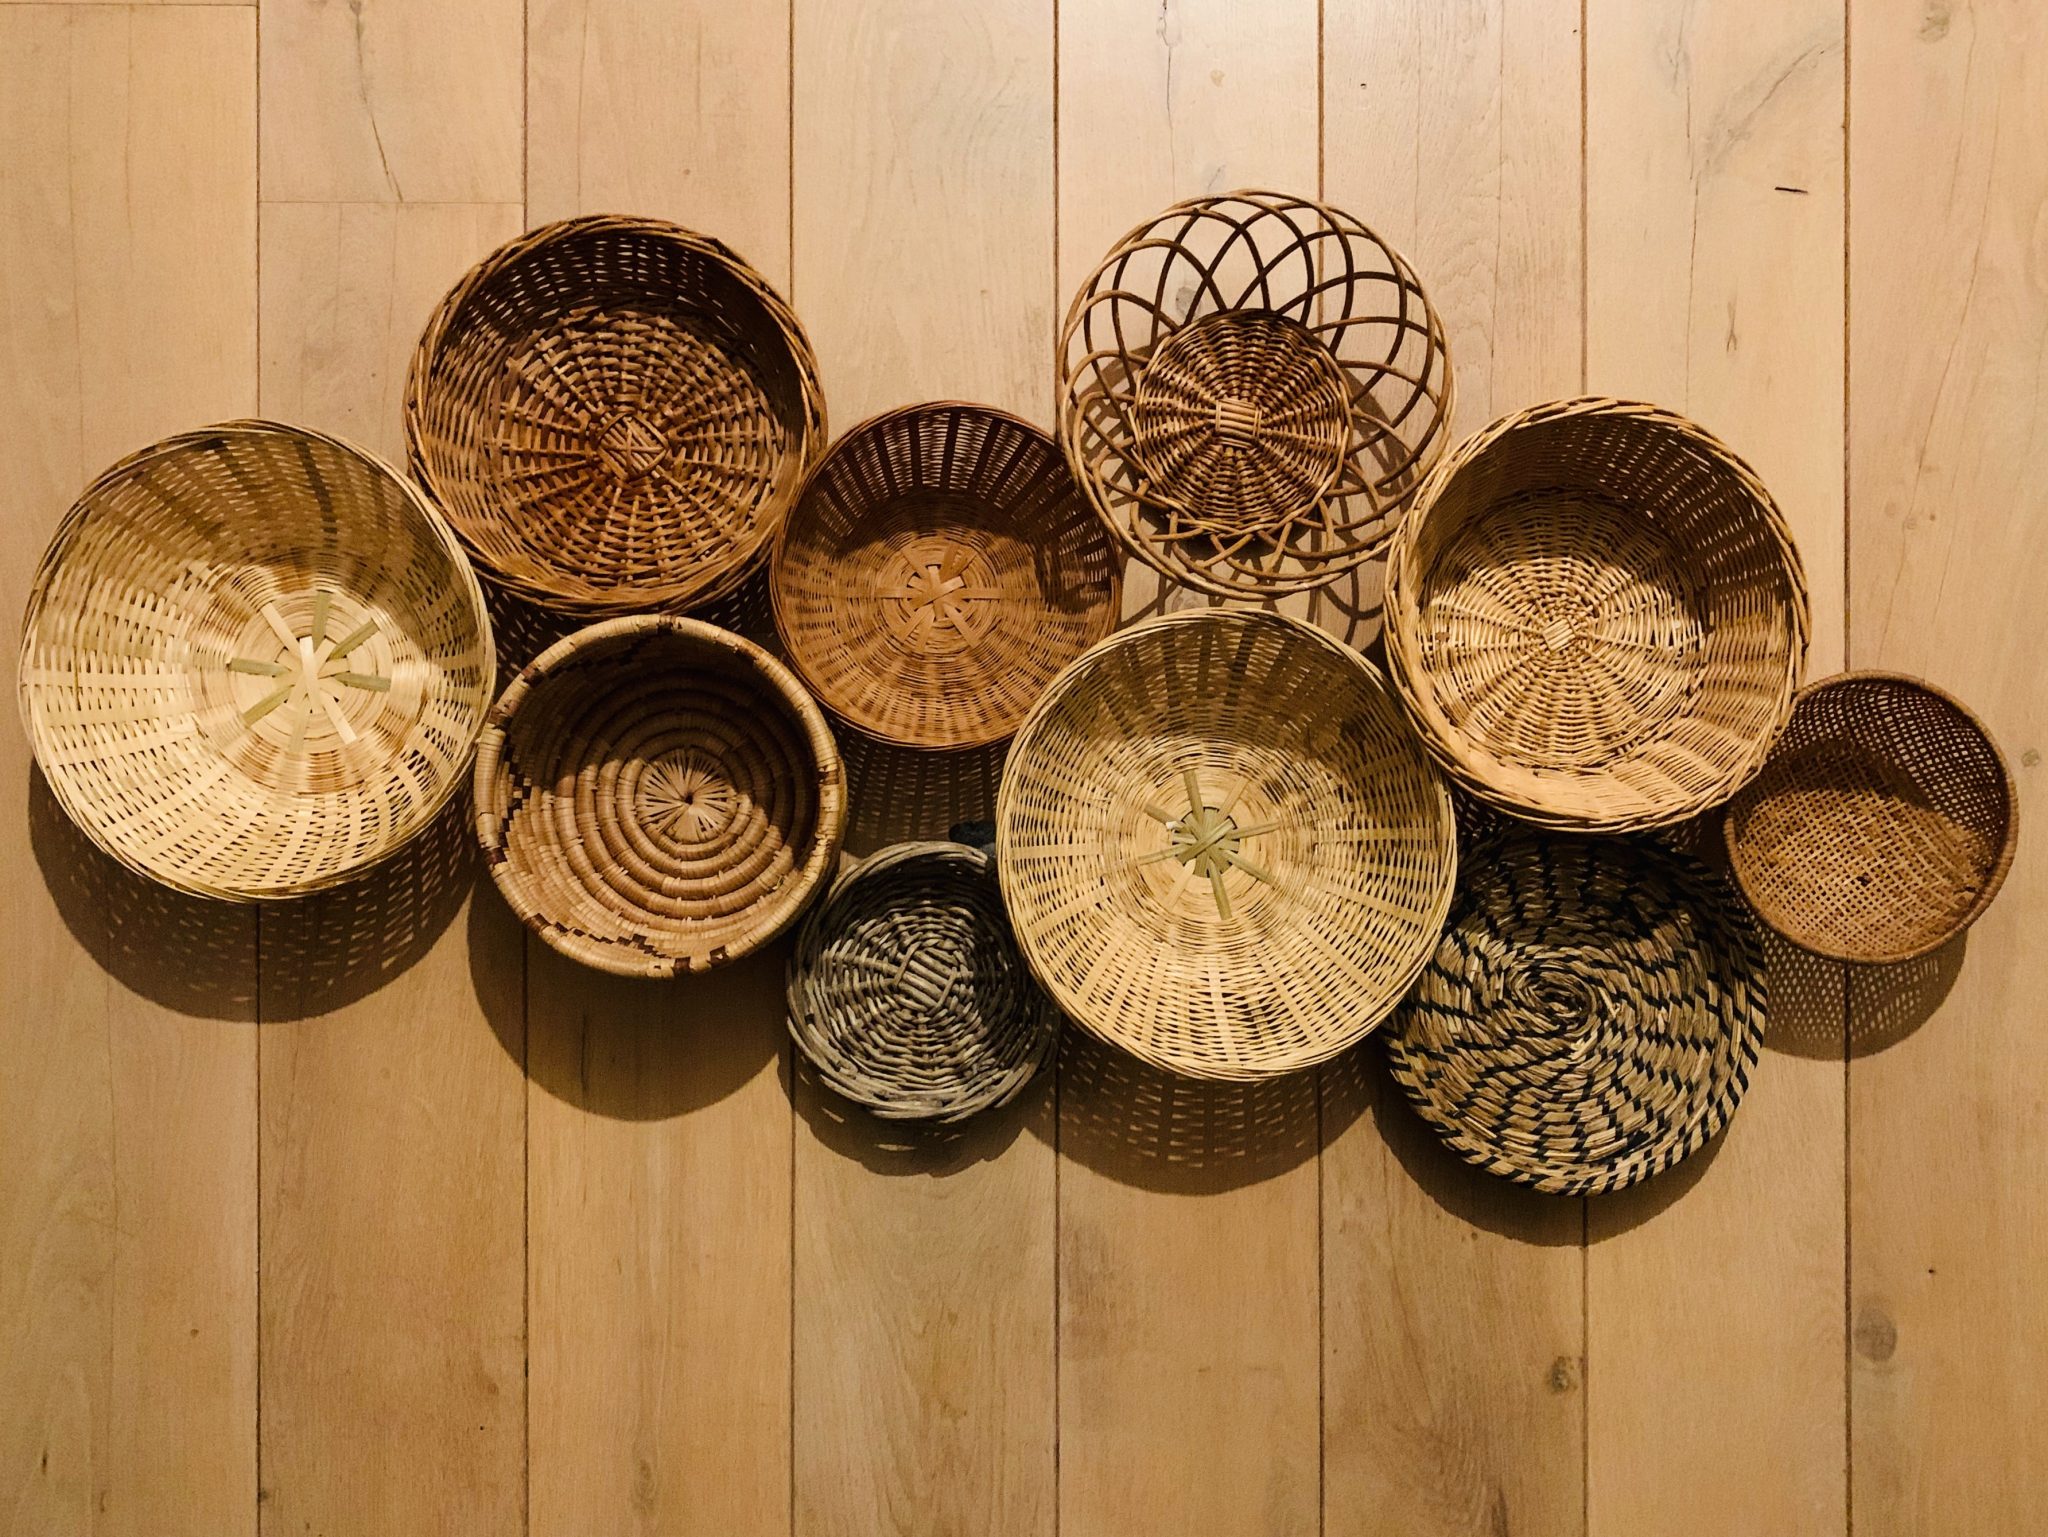 House of Bamboo Well-Being Series | Basket Weaving Workshop for Kids